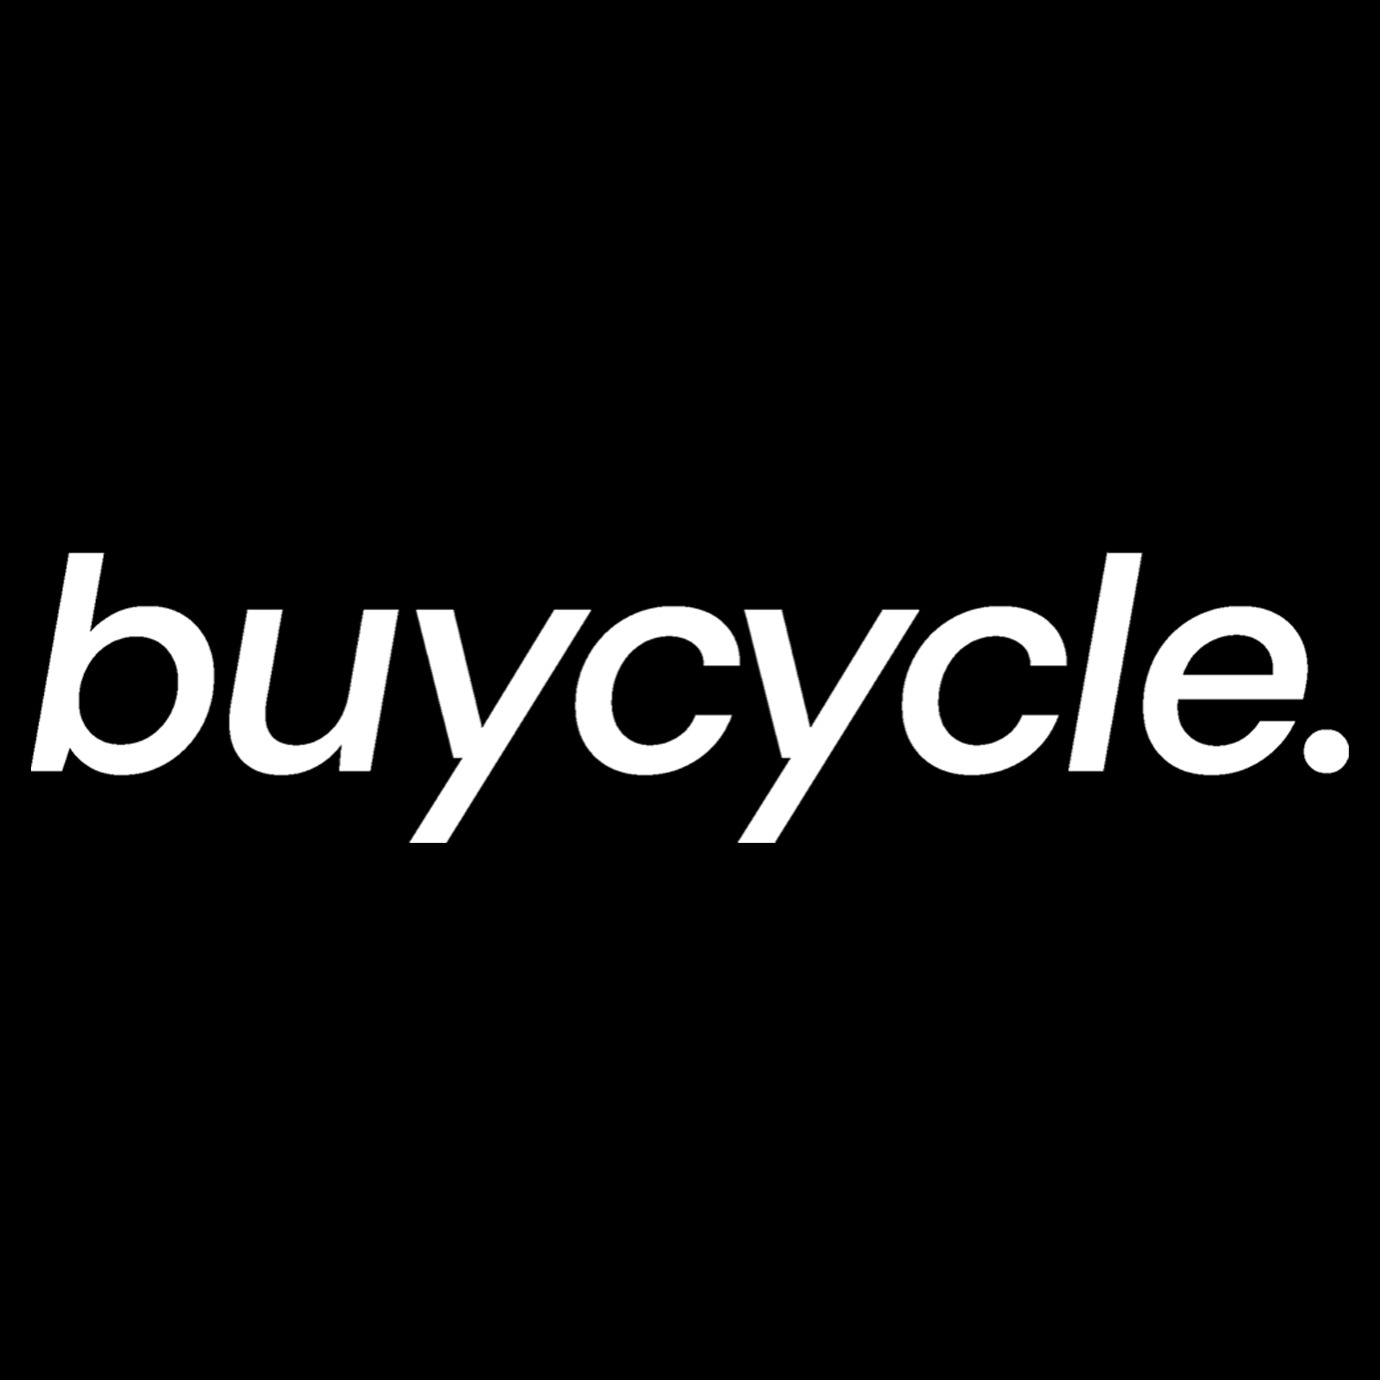 Buycycle in München - Logo